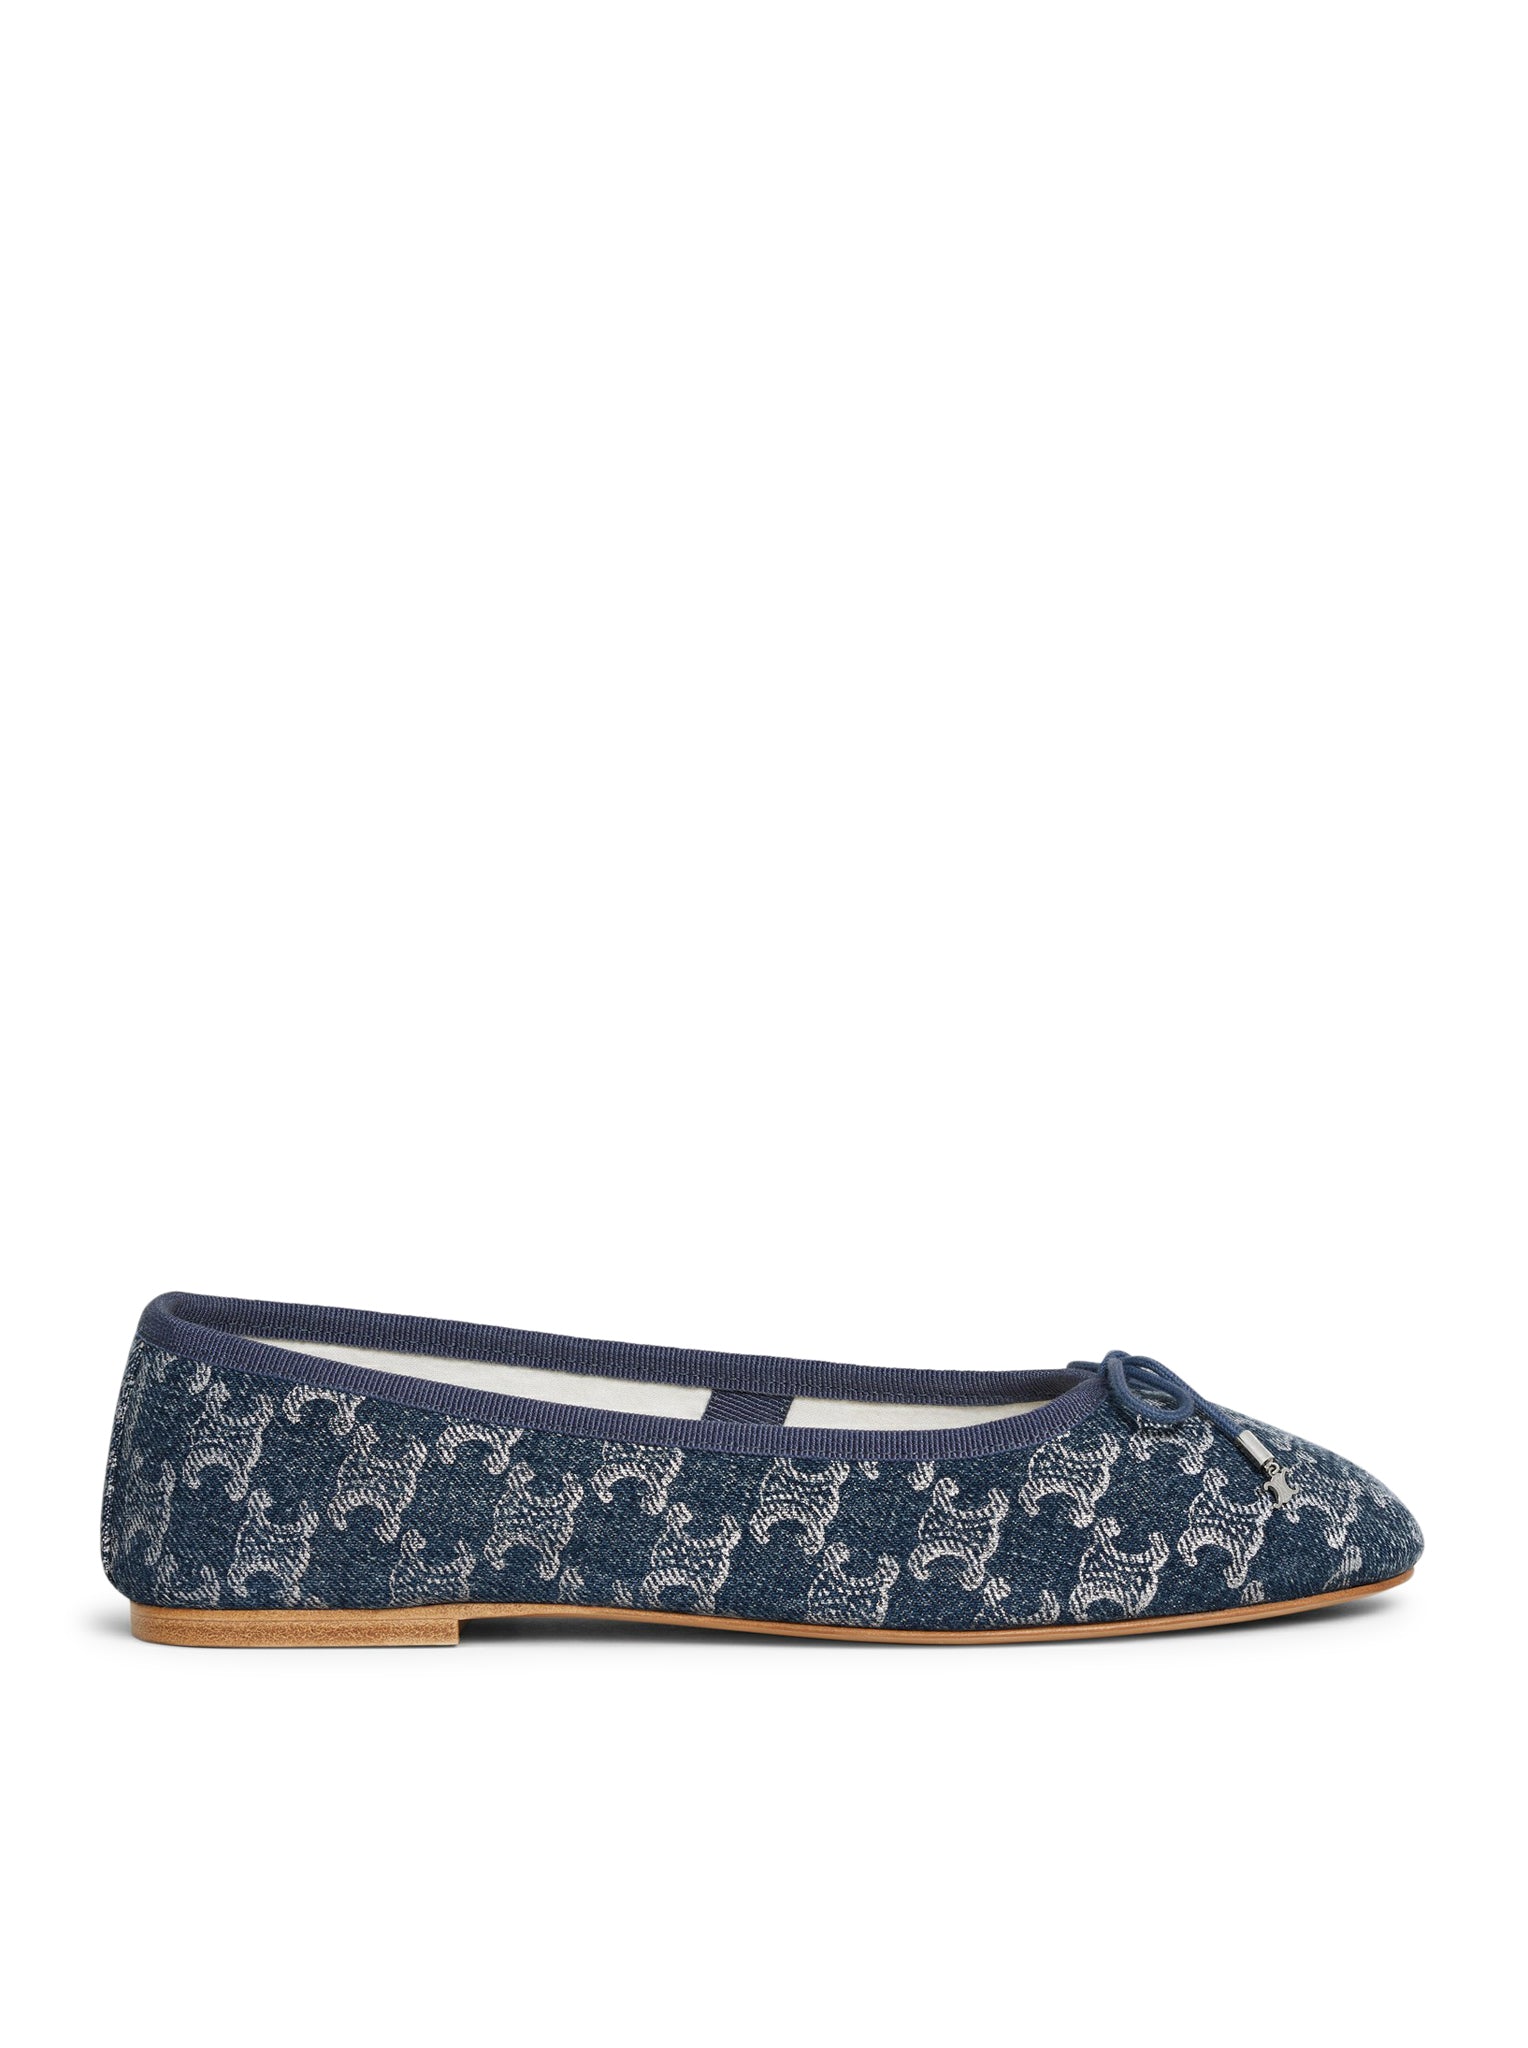 LES BALLERINES CELINE BALLERINA WITH TRIOMPHE LACE-UP IN PRINTED DENIM